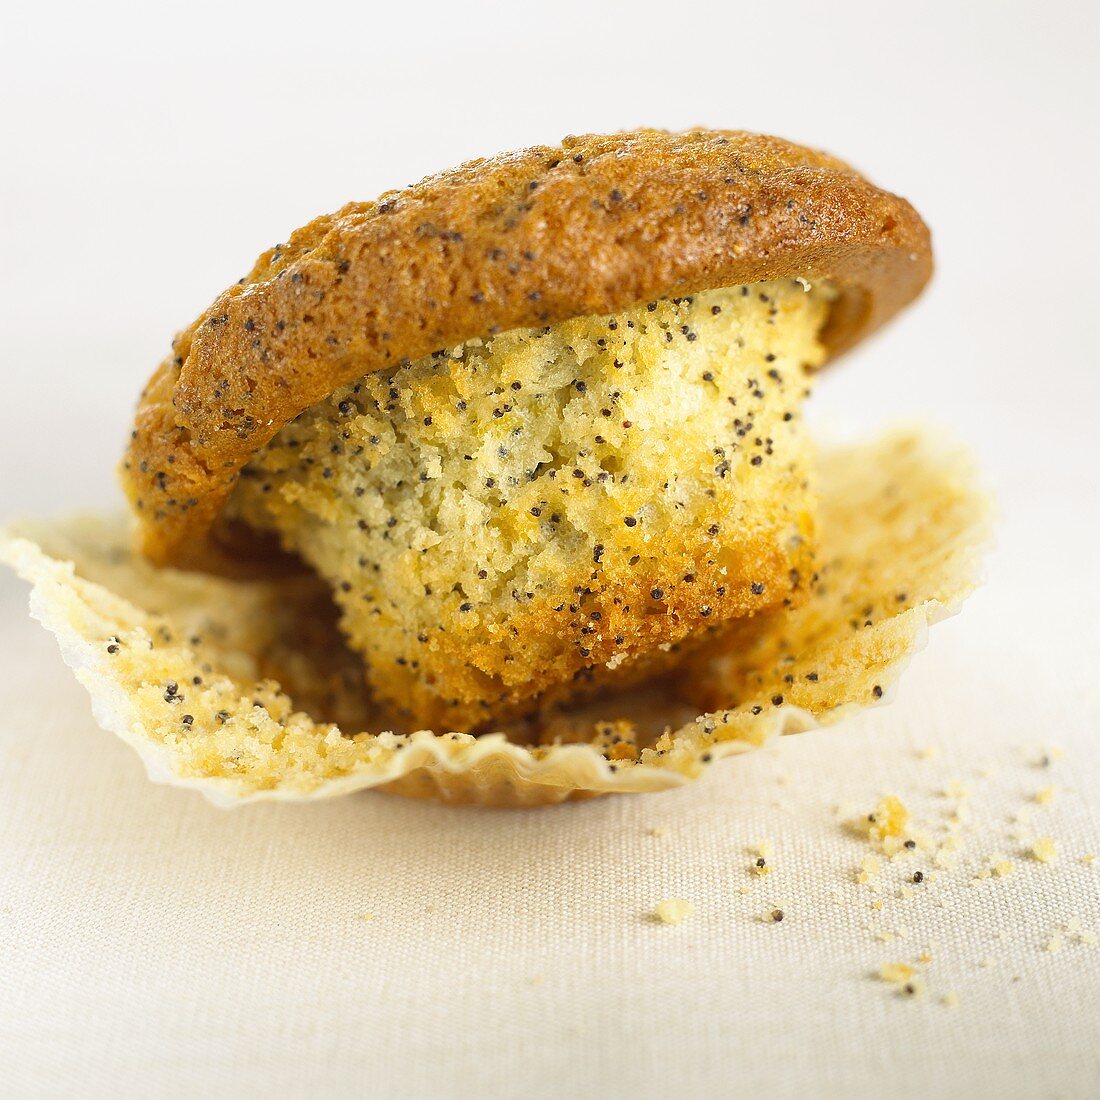 Lemon and poppy seed muffin